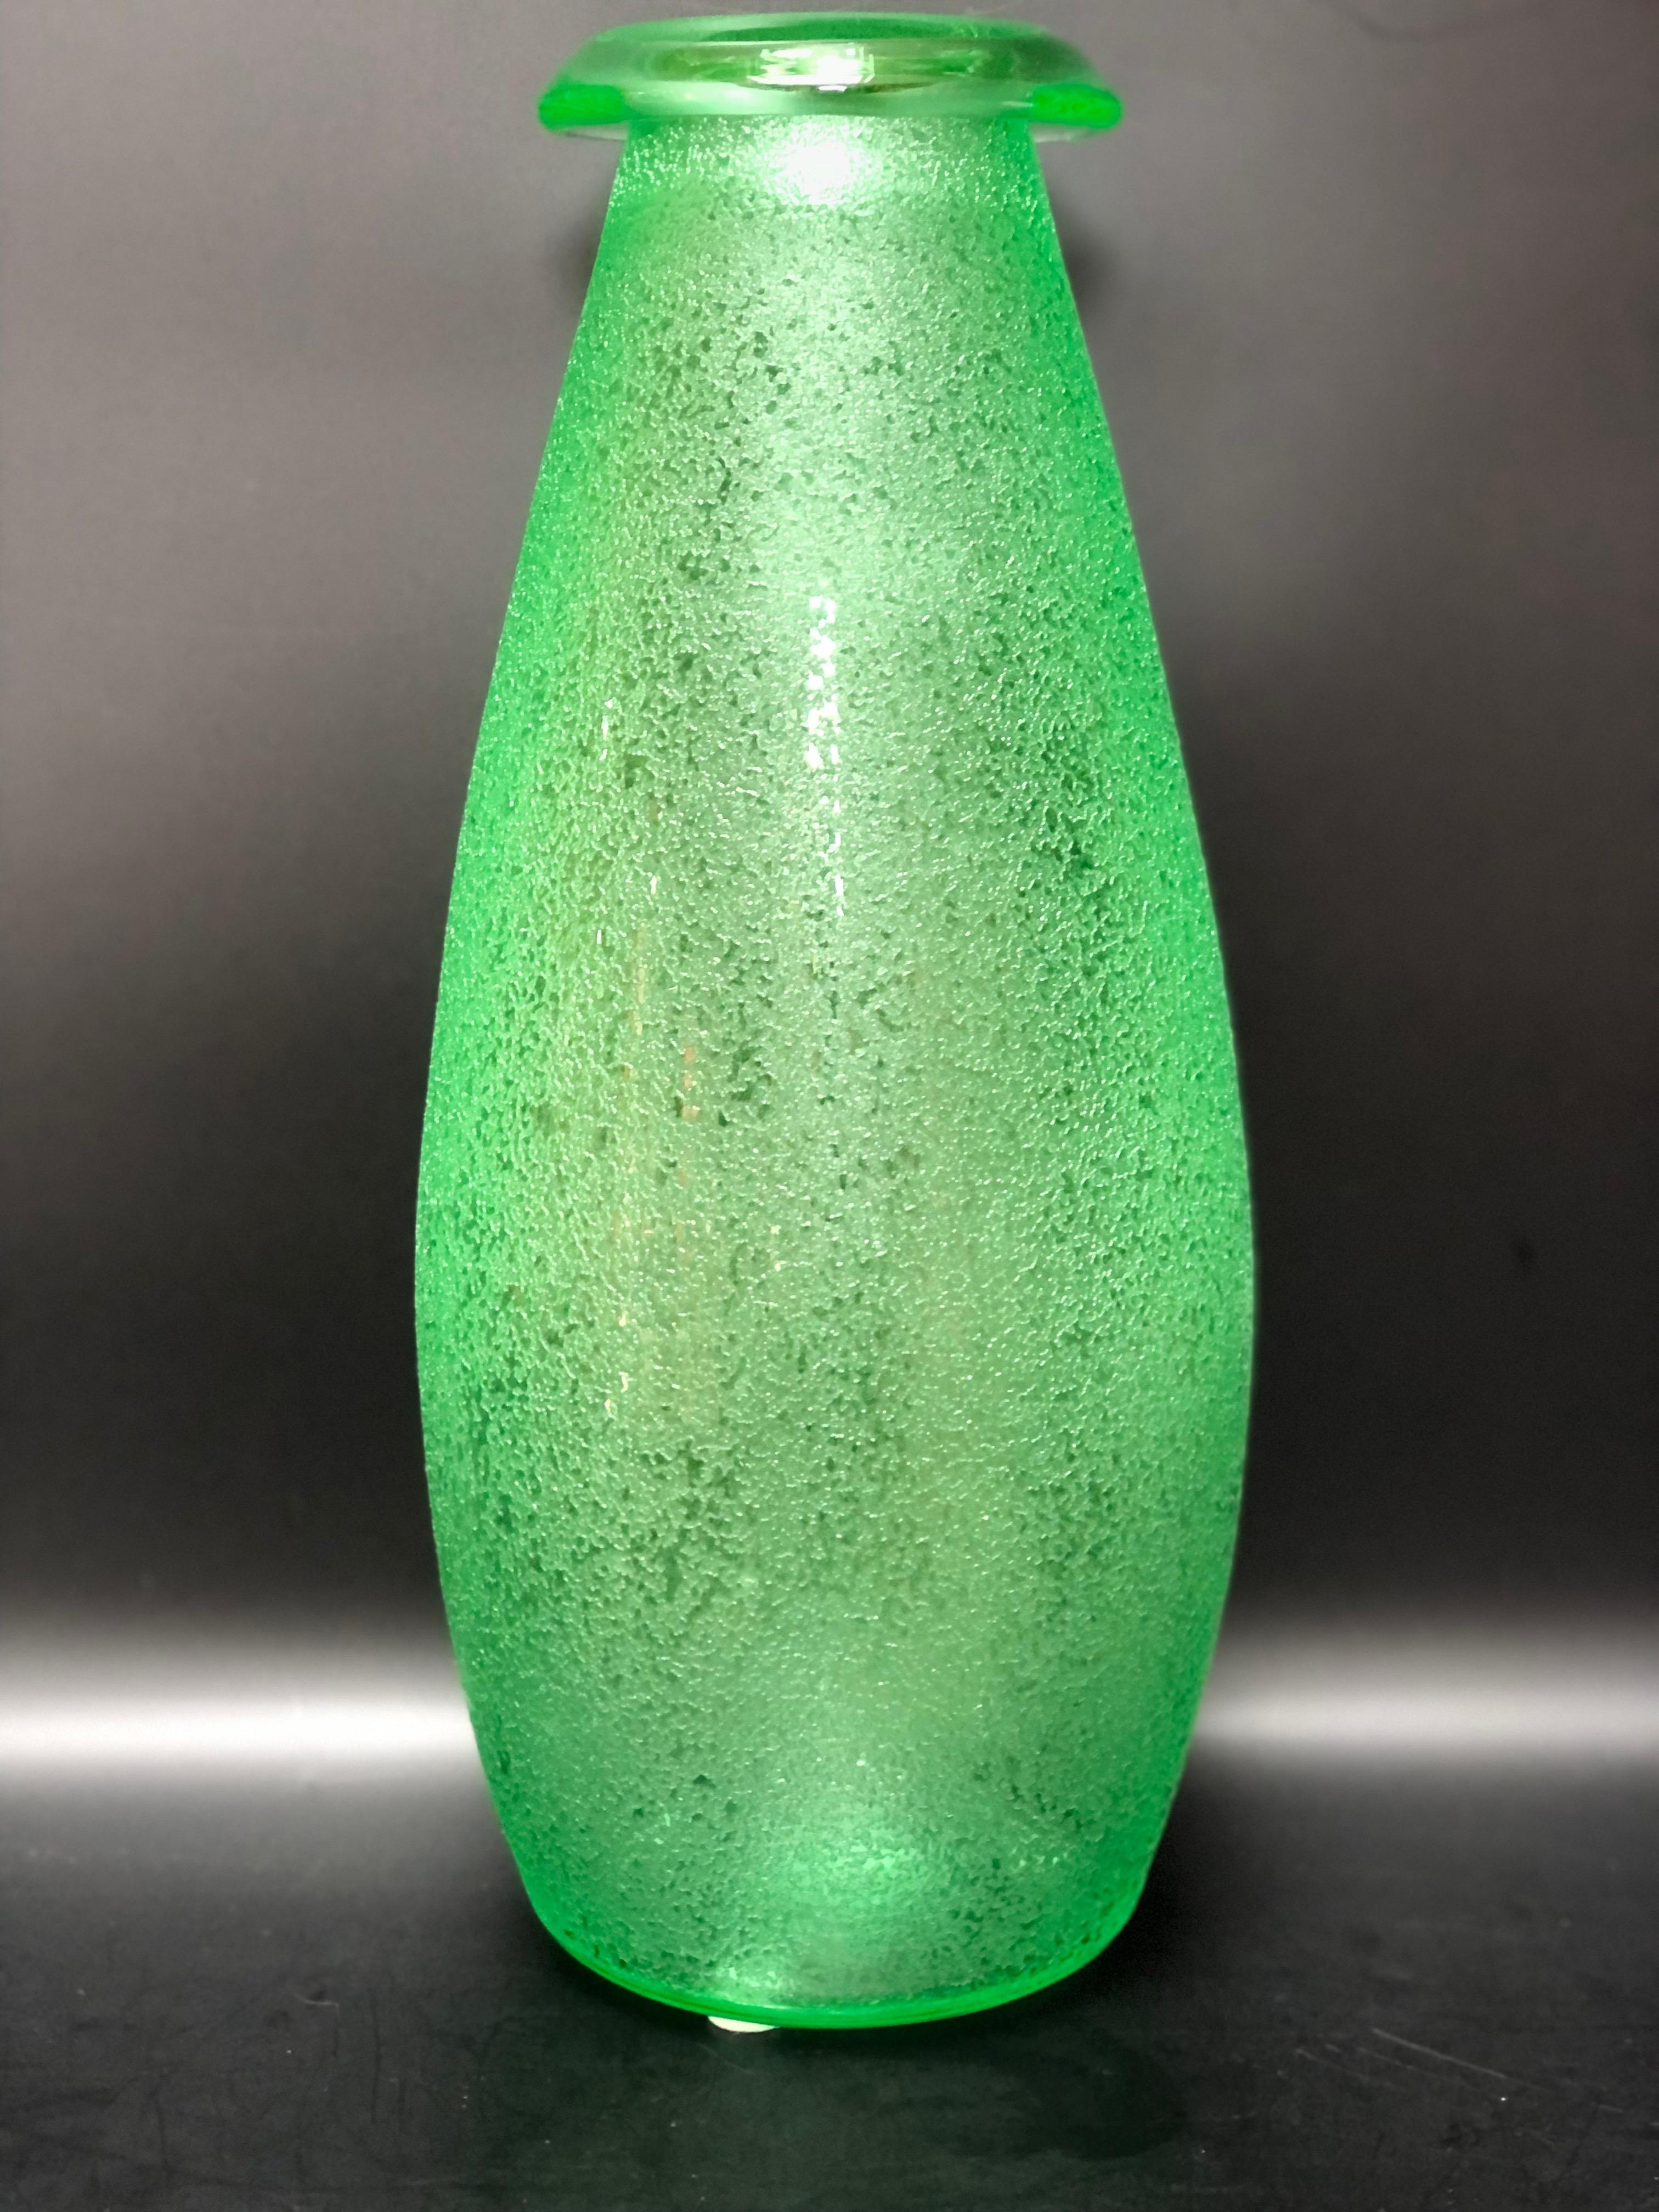 Daum circa 1930, large ovoid vase entirely acid-etched, apple green.
In perfect condition.
Signed Daum Nancy France.

Diameter: 15 cm (cul) 
Diamètre : 13,5 cm (col)
Height: 47,5 cm
Weight: 5 Kg

Daum (French establishment created in 1878) is a